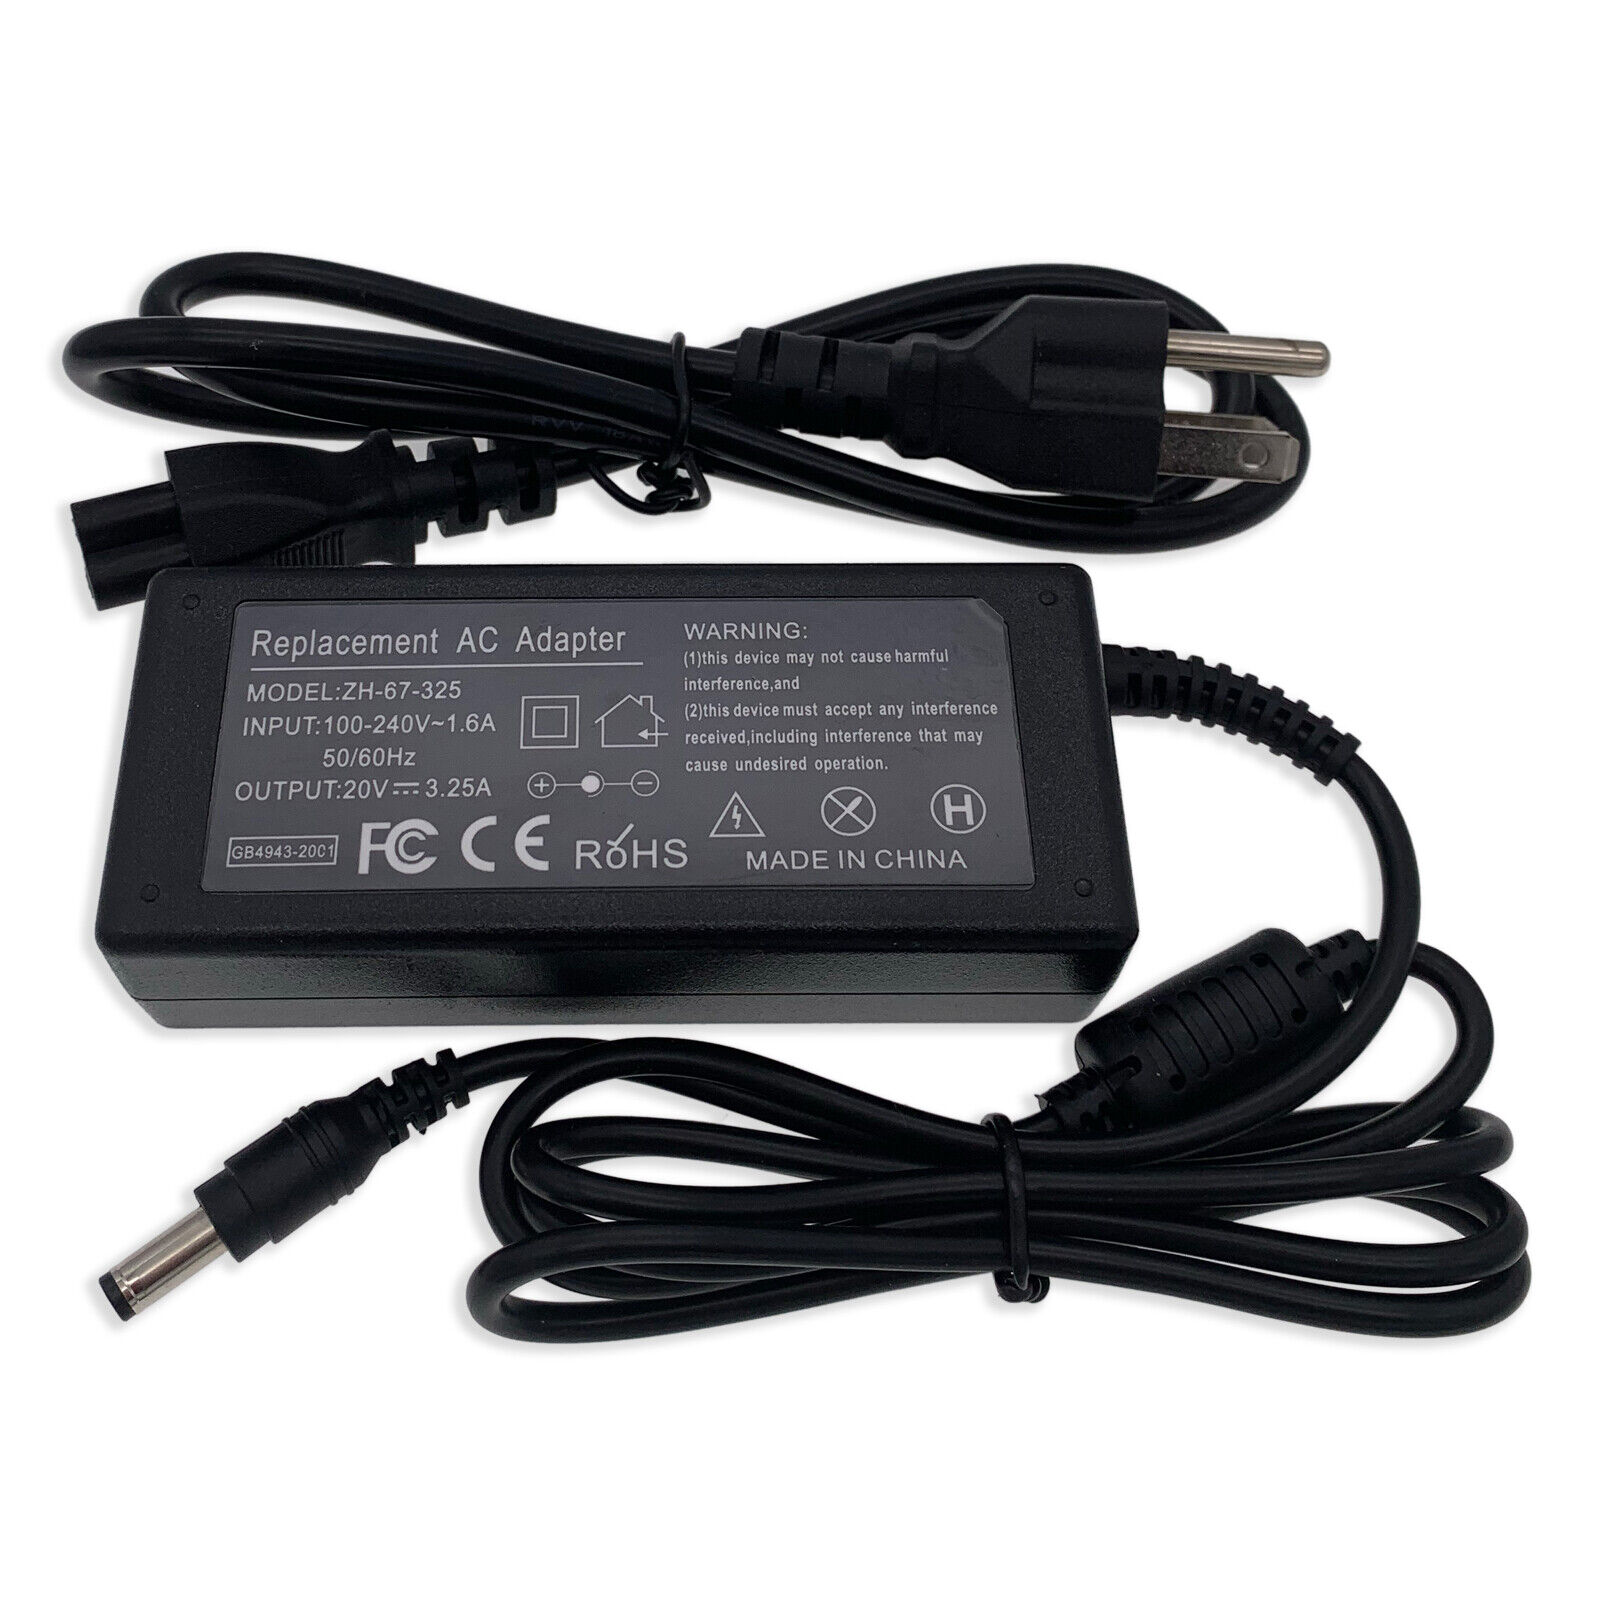 AC Adapter Charger Power Supply Cord For Zebra LP2824 LP2844 LP2844-Z Printer